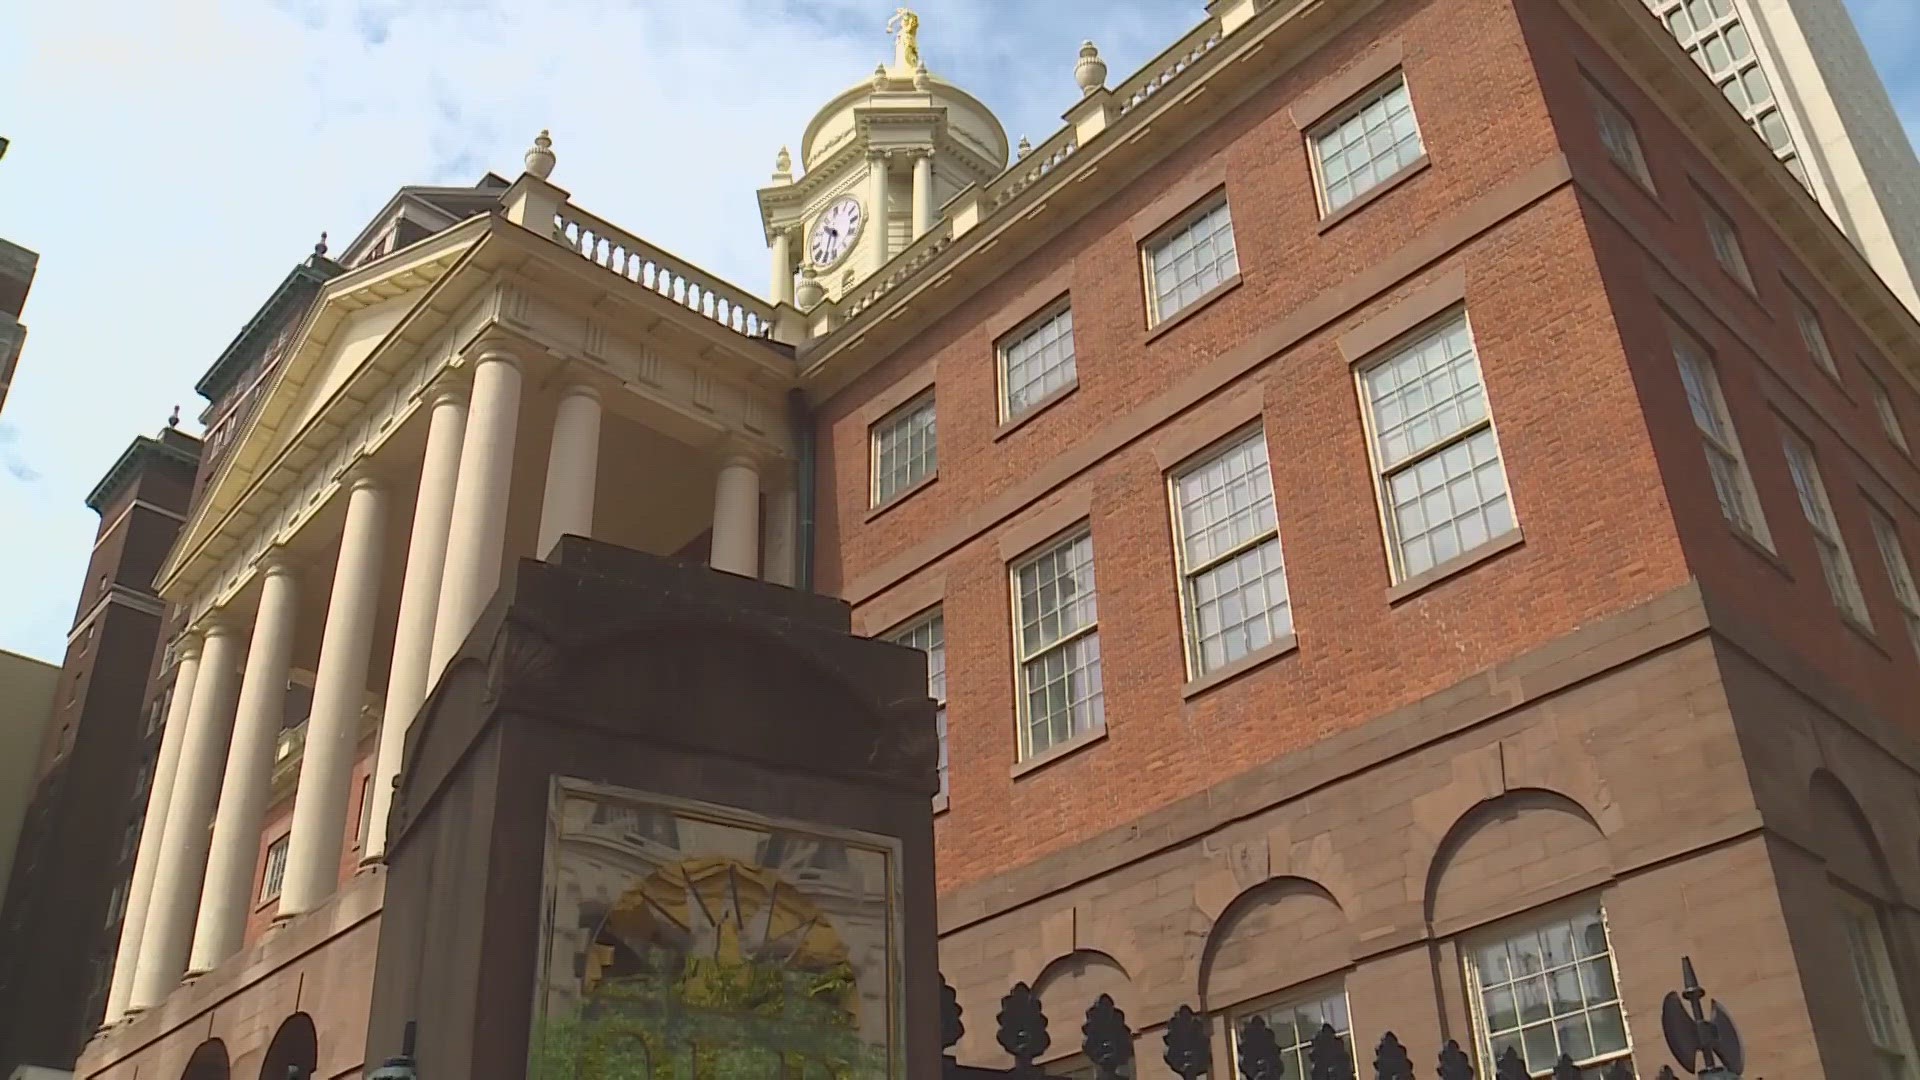 Connecticut’s Old State House in Hartford will offer free admission on Saturday from Noon to 5 p.m.